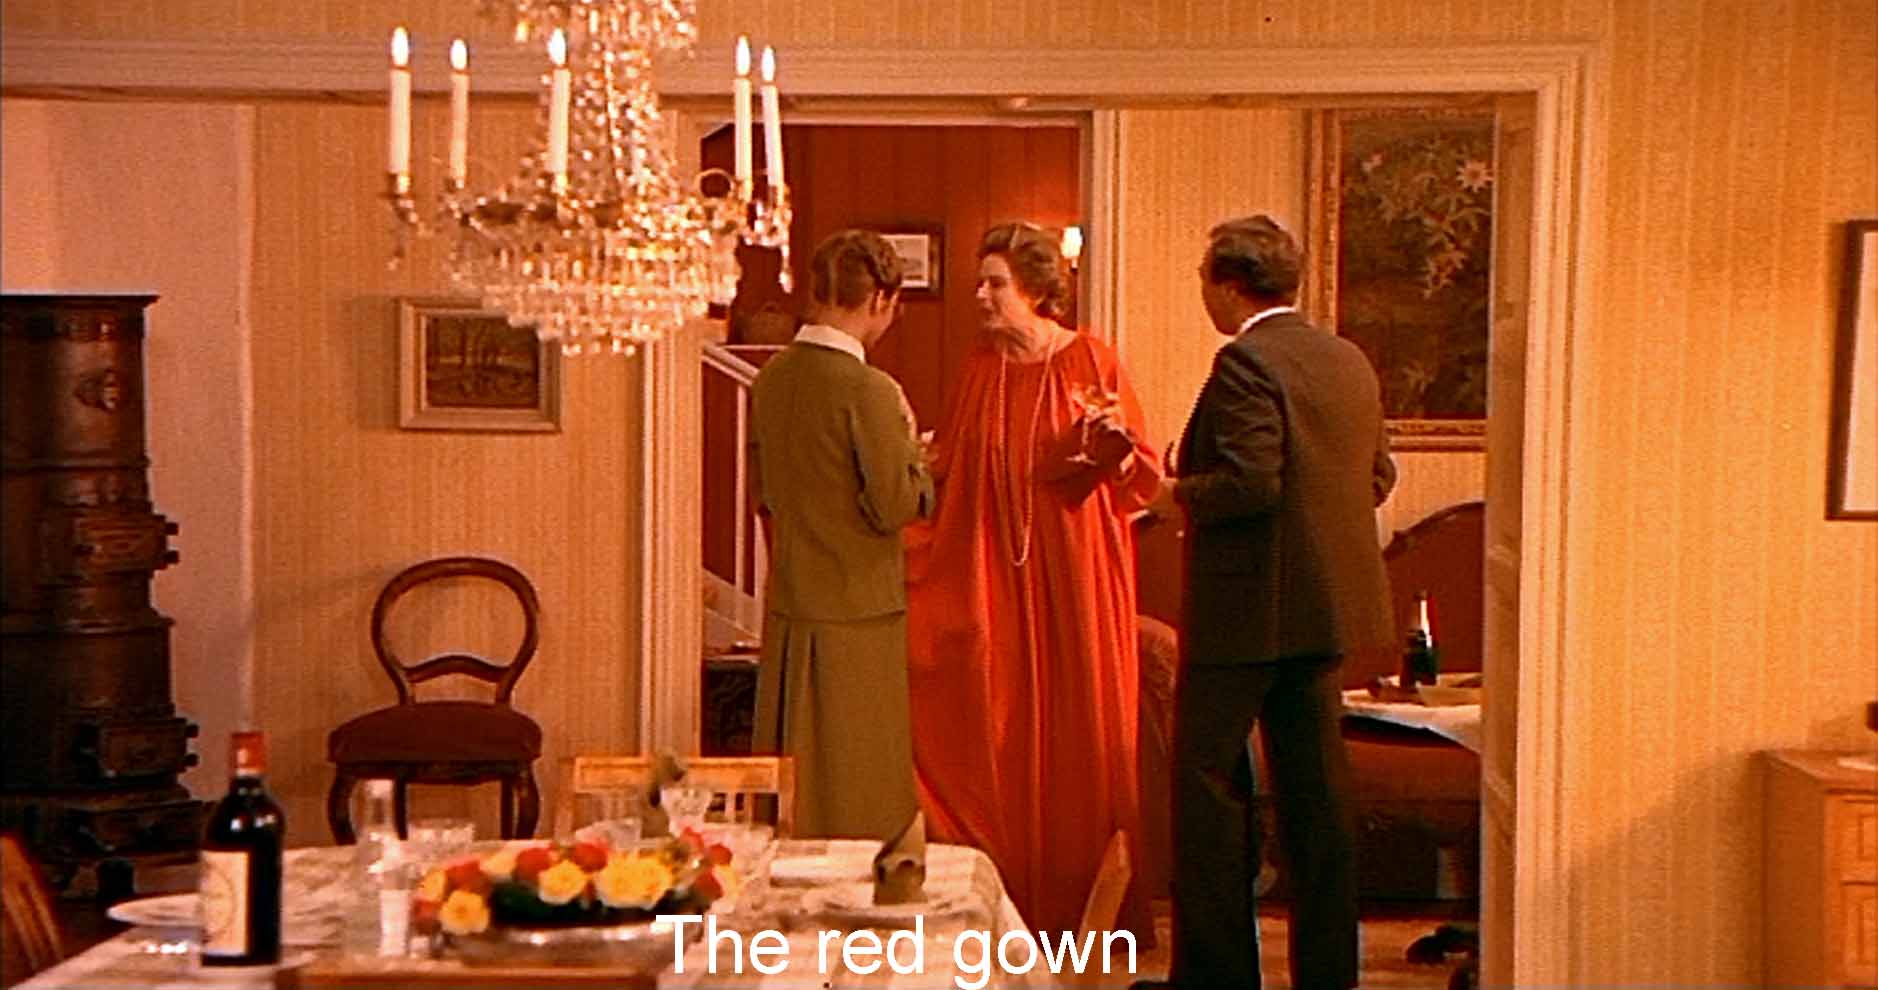 The red gown